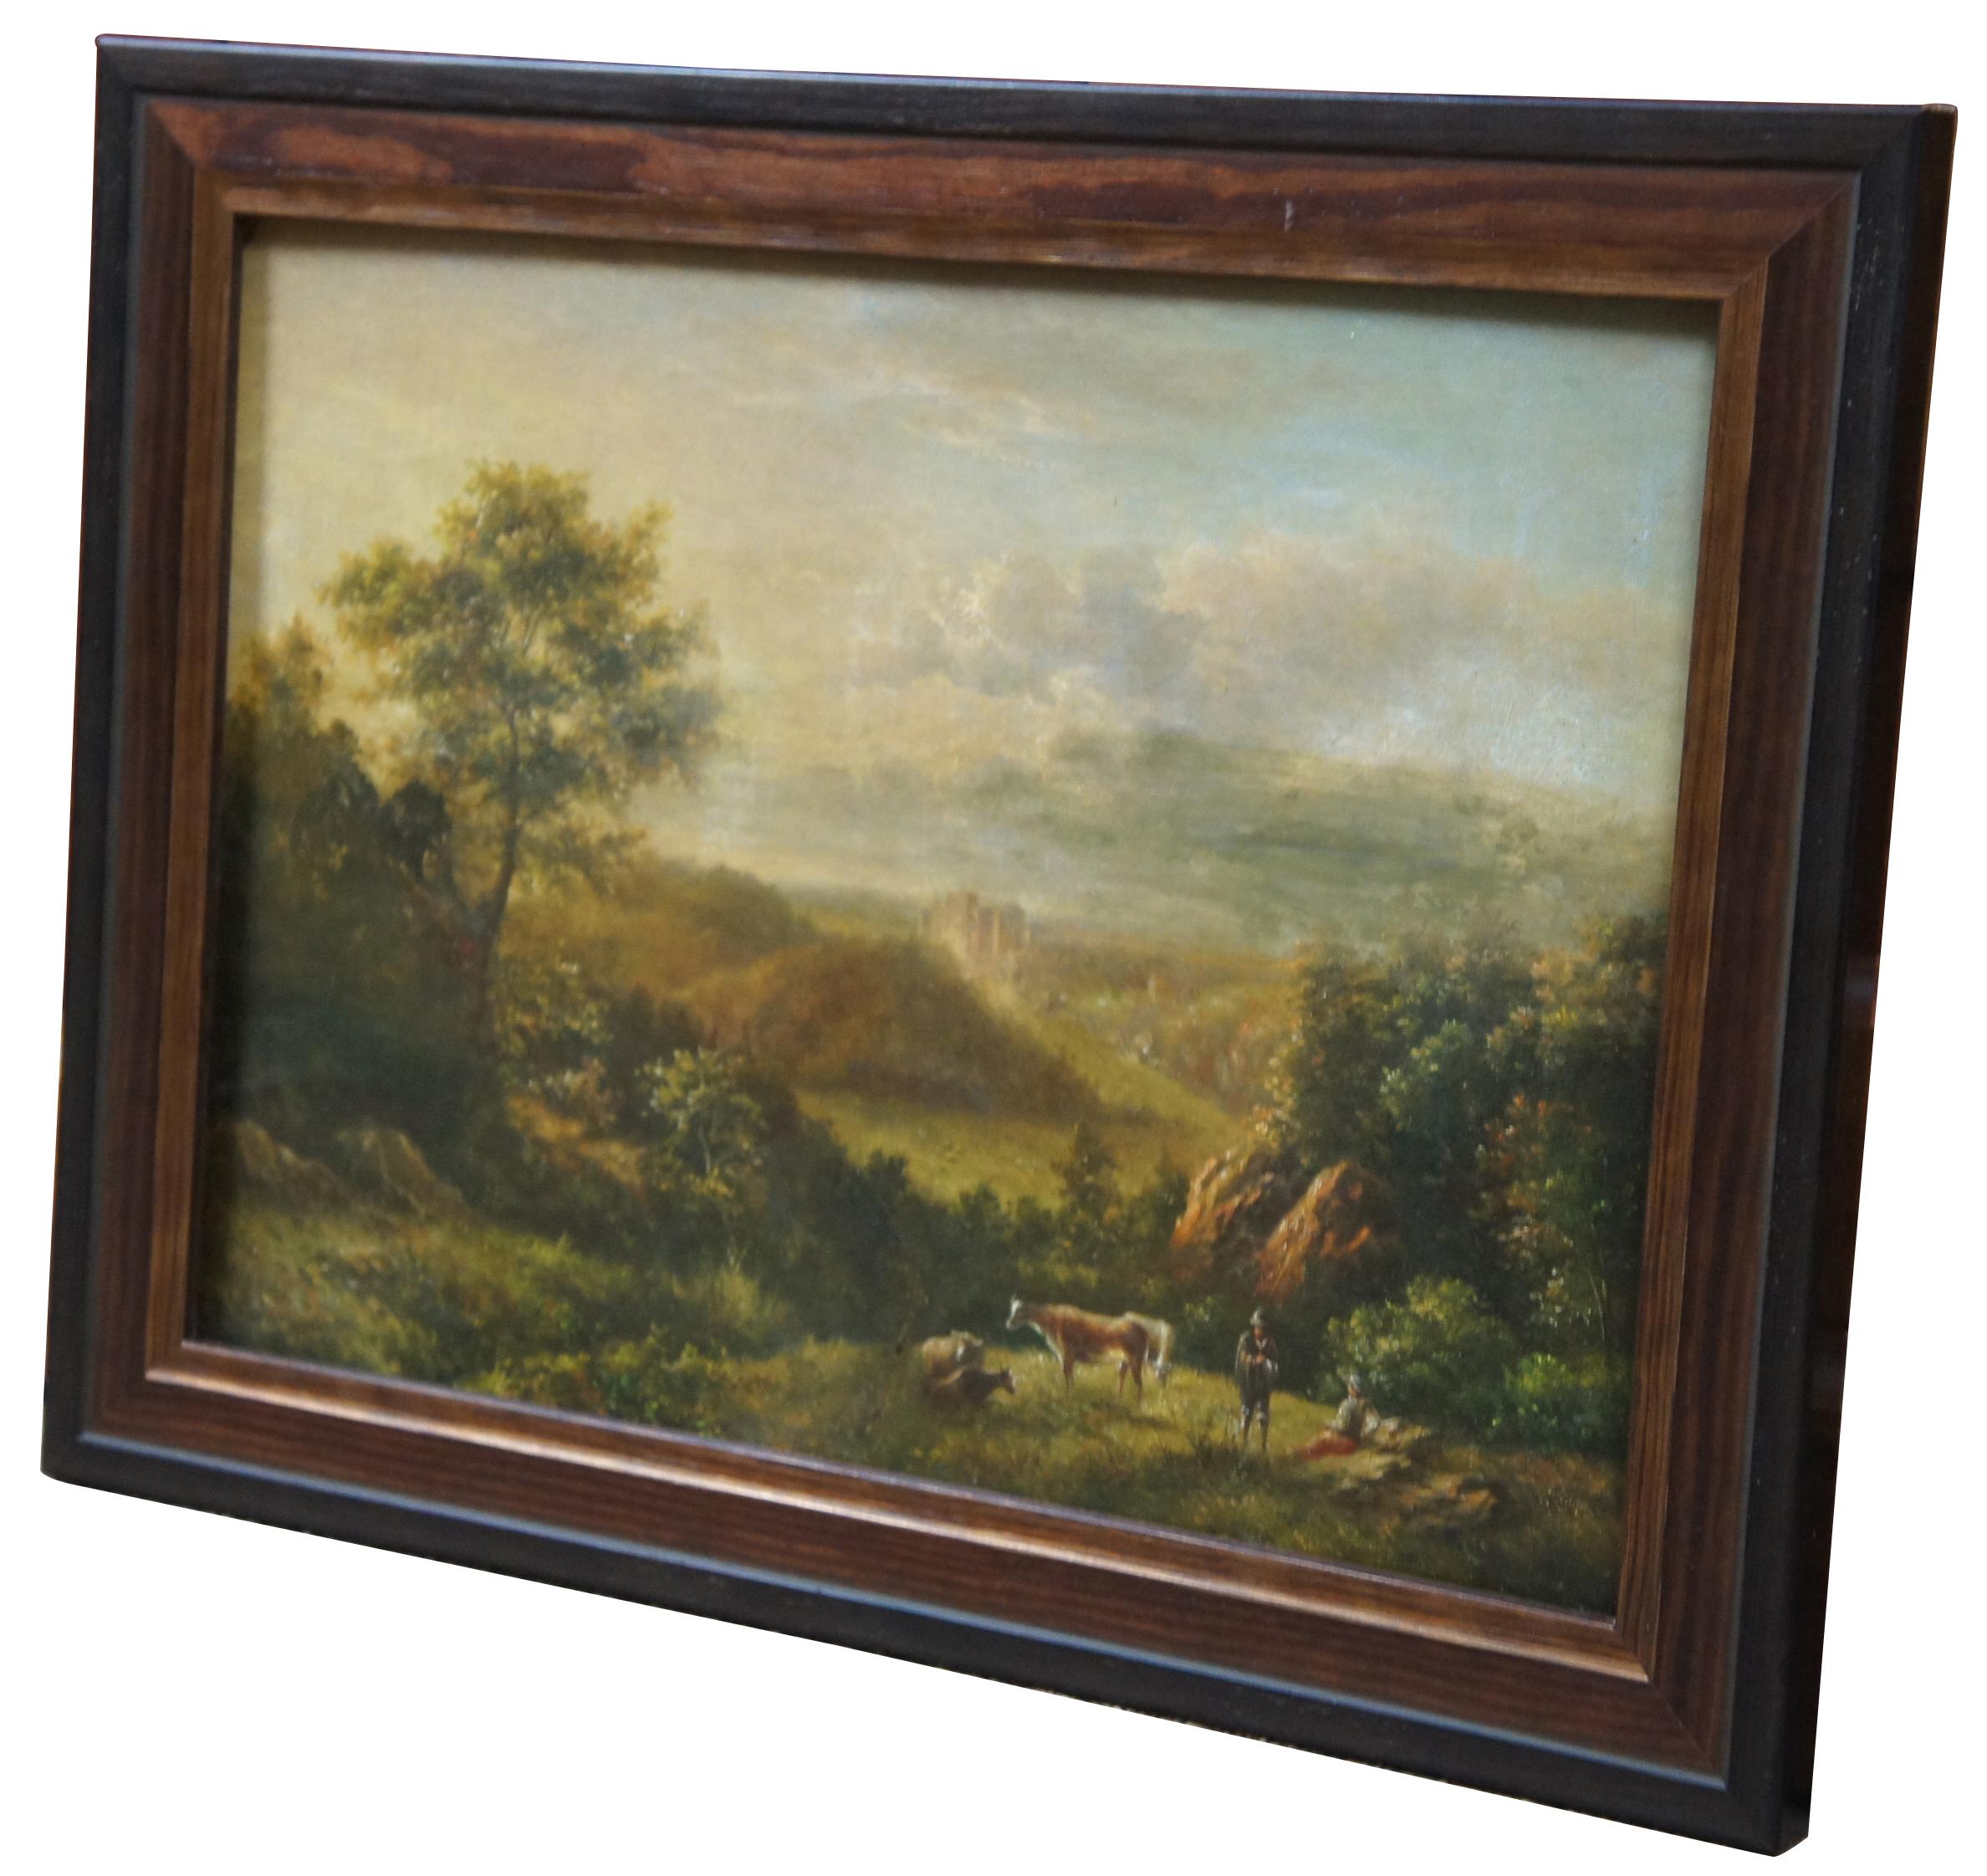 A lovely antique European oil on board. Features two figures and cattle in a rural landscape with a castle or cheateau in the background. Measures: 18